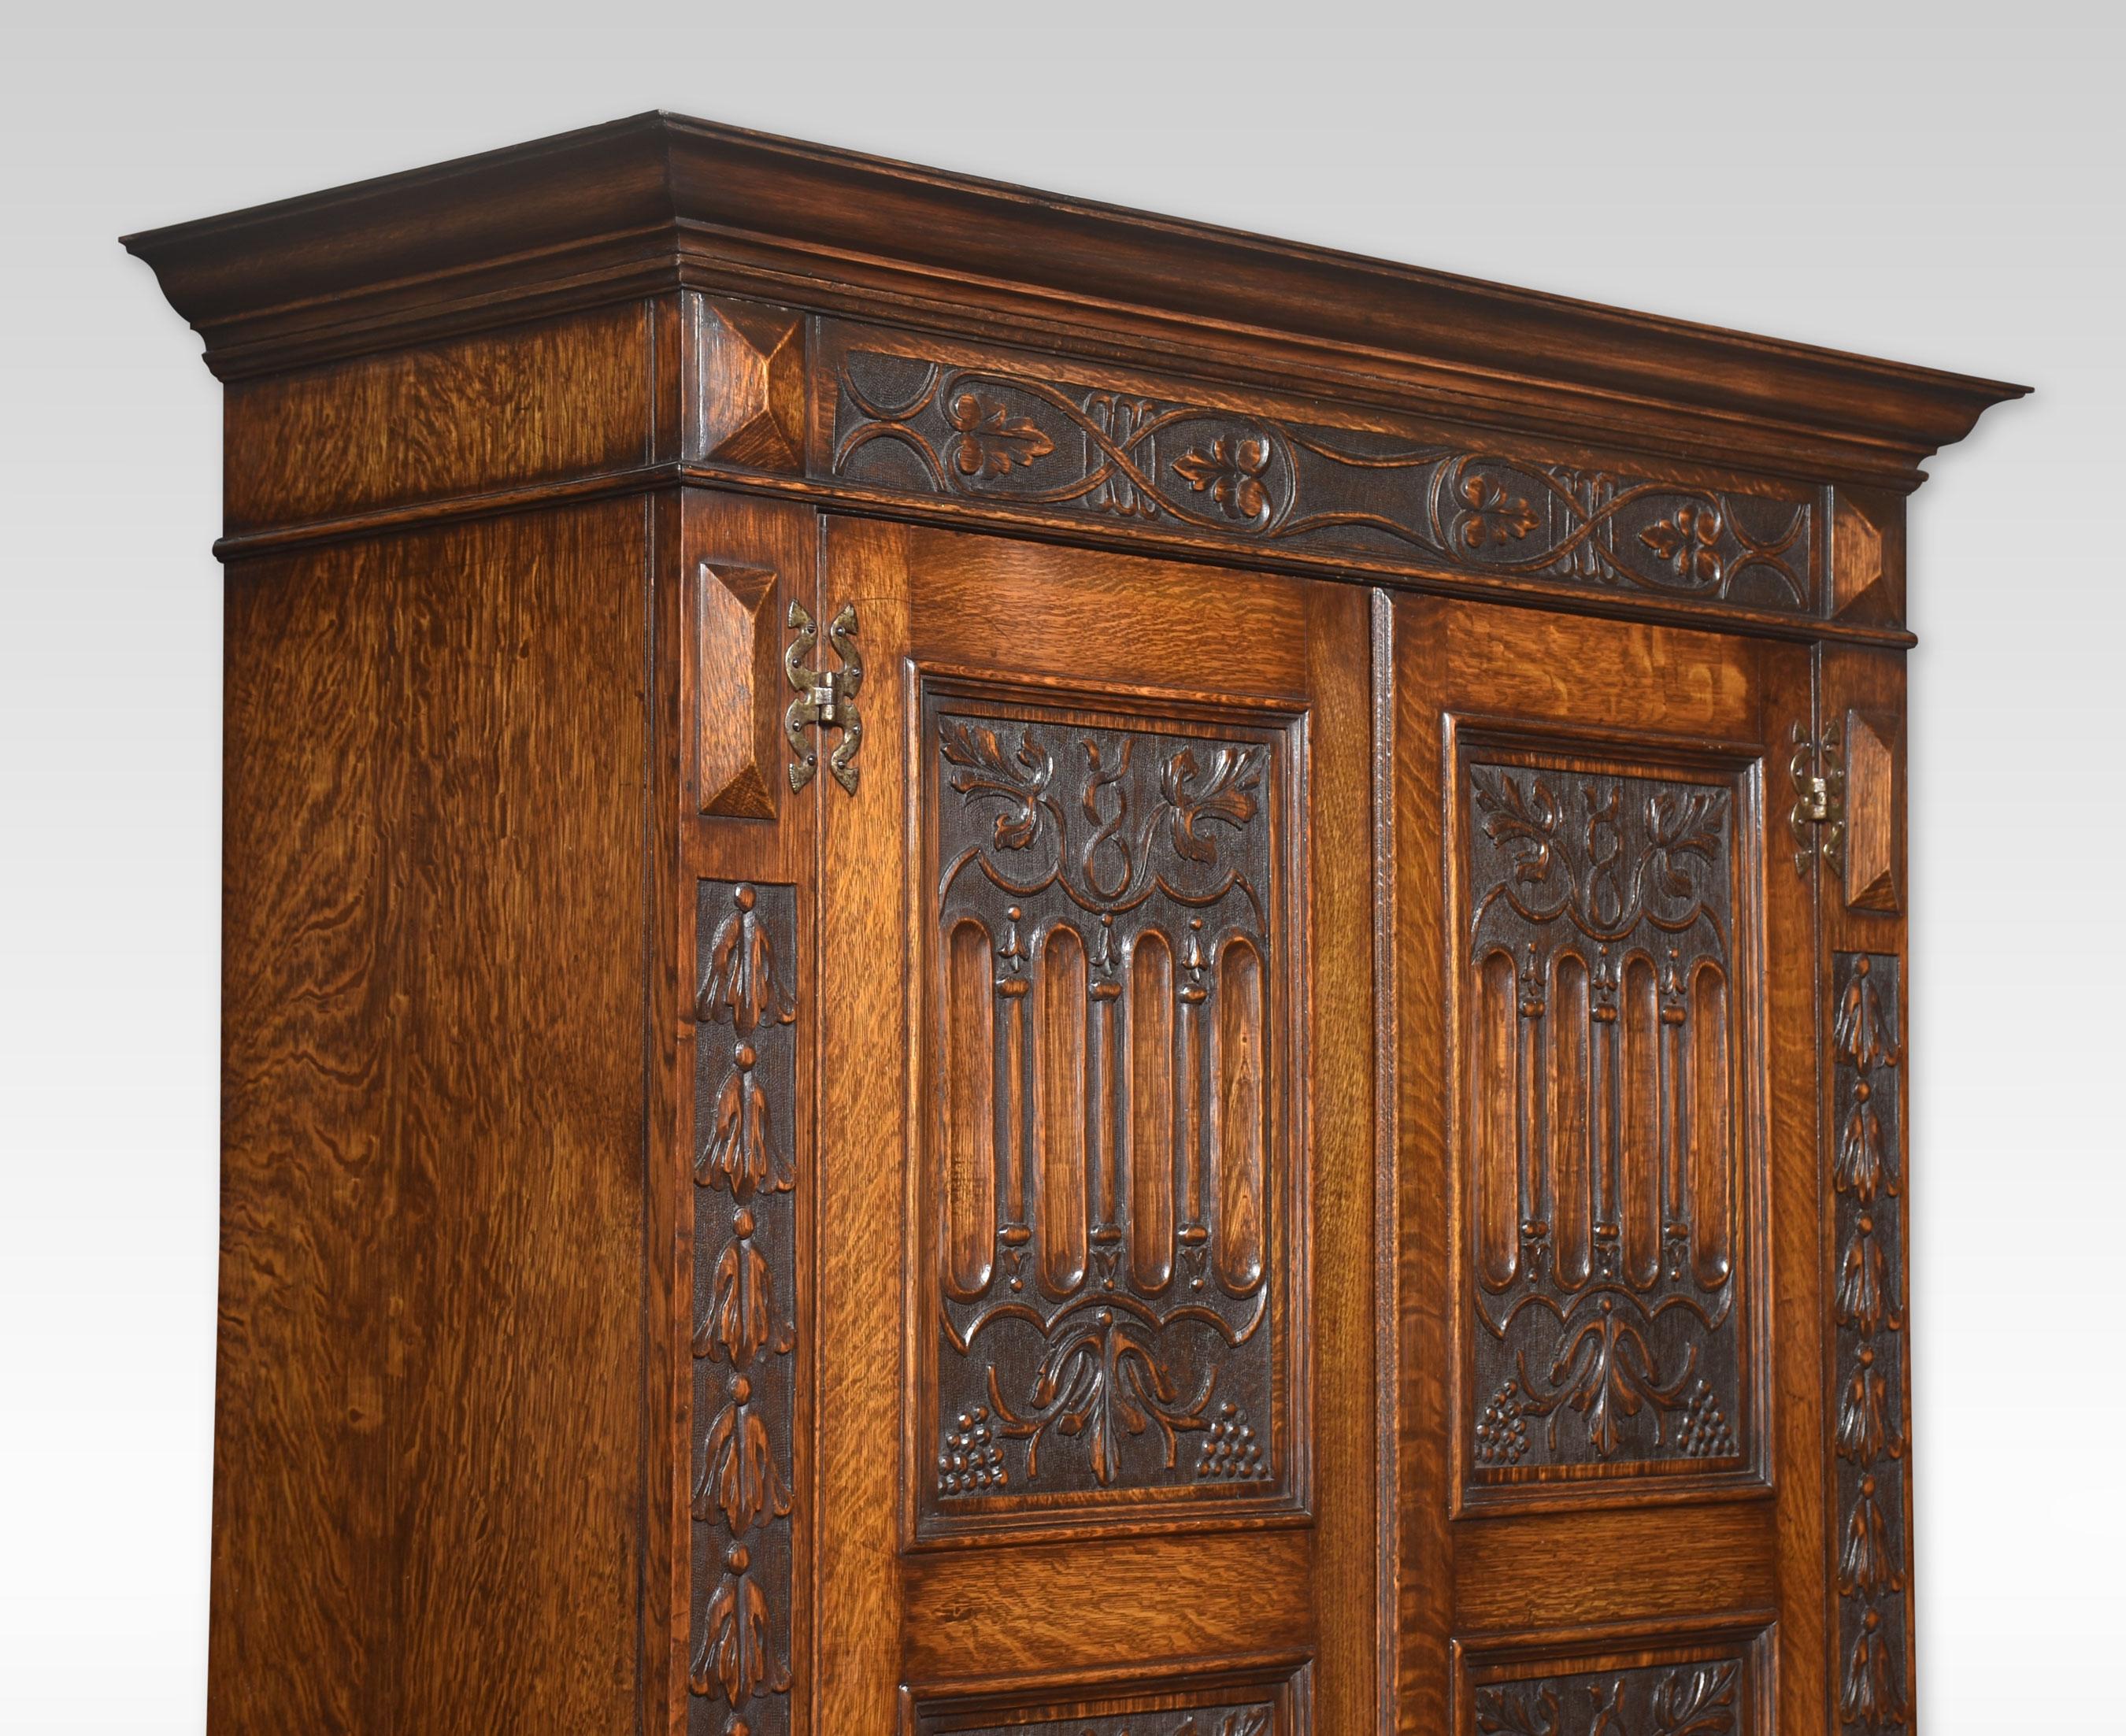 Gothic revival oak wardrobe the projecting cornice above two large panelled doors having Gothic carving throughout, the two panelled doors opening to reveal a large storage area and hanging rail. Raised up on a plinth base.
Dimensions
Height 76.5